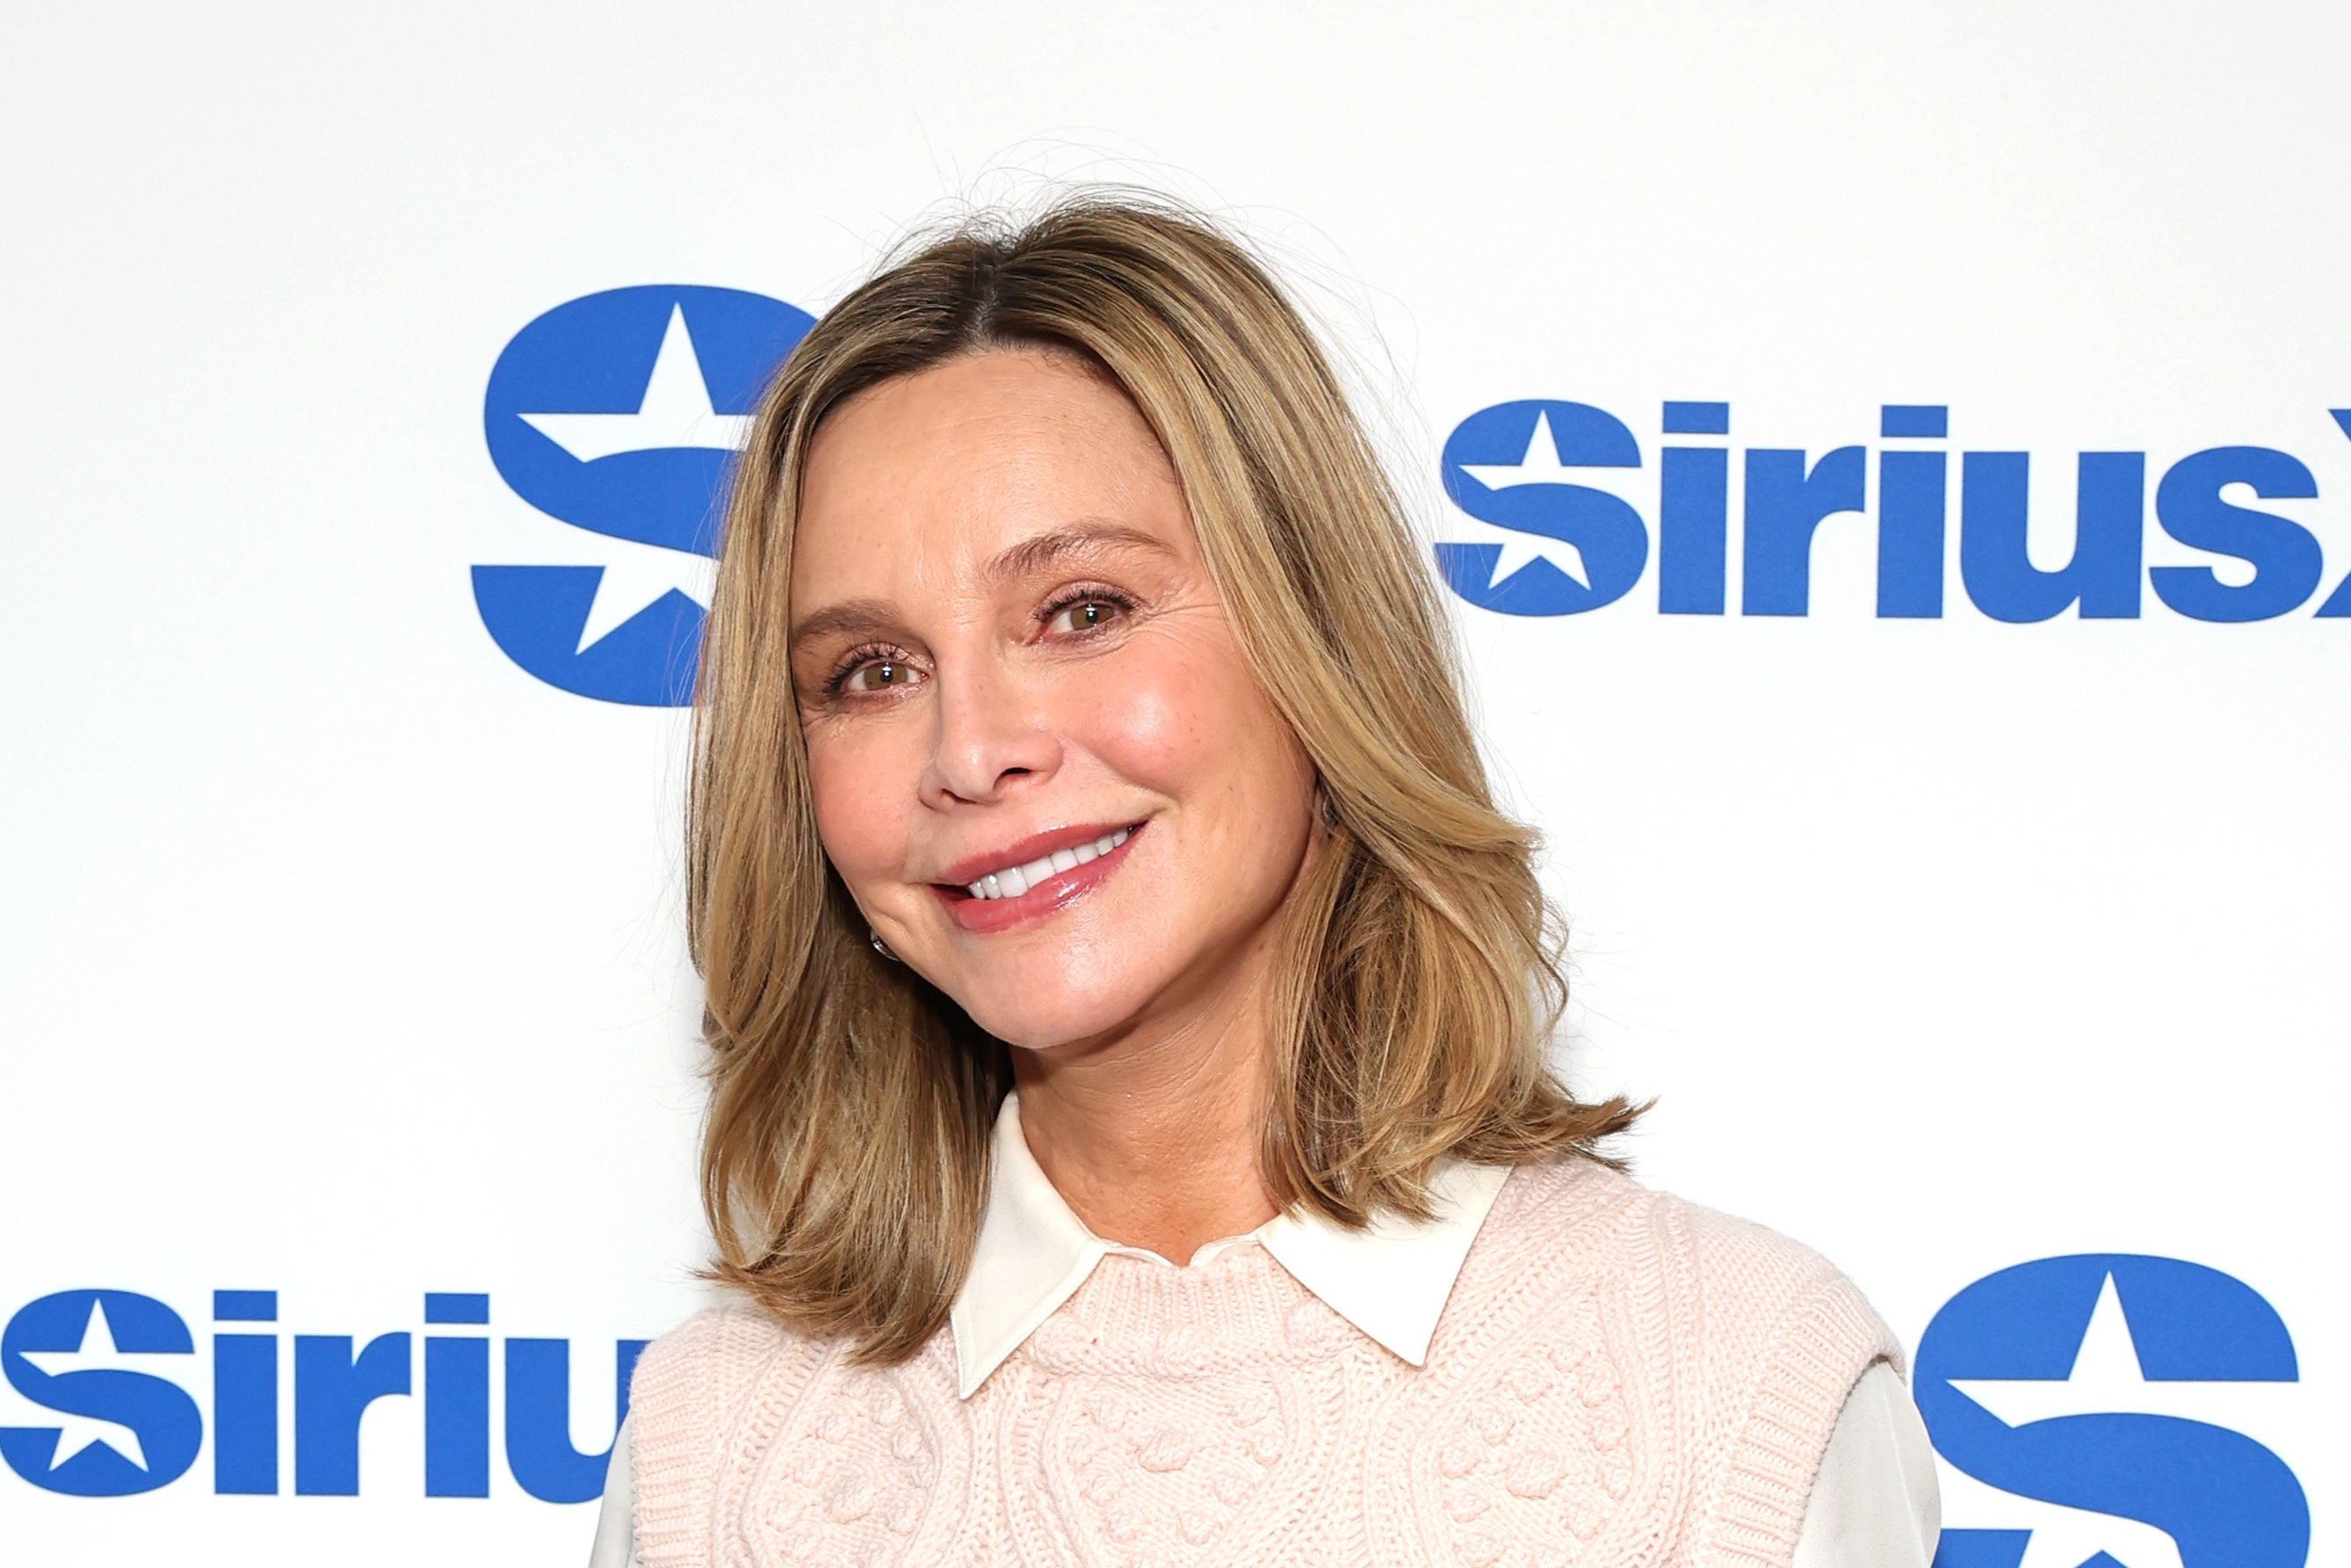 paparazzi, fame, harrison ford, calista flockhart says sudden ally mcbeal fame affected her mental health